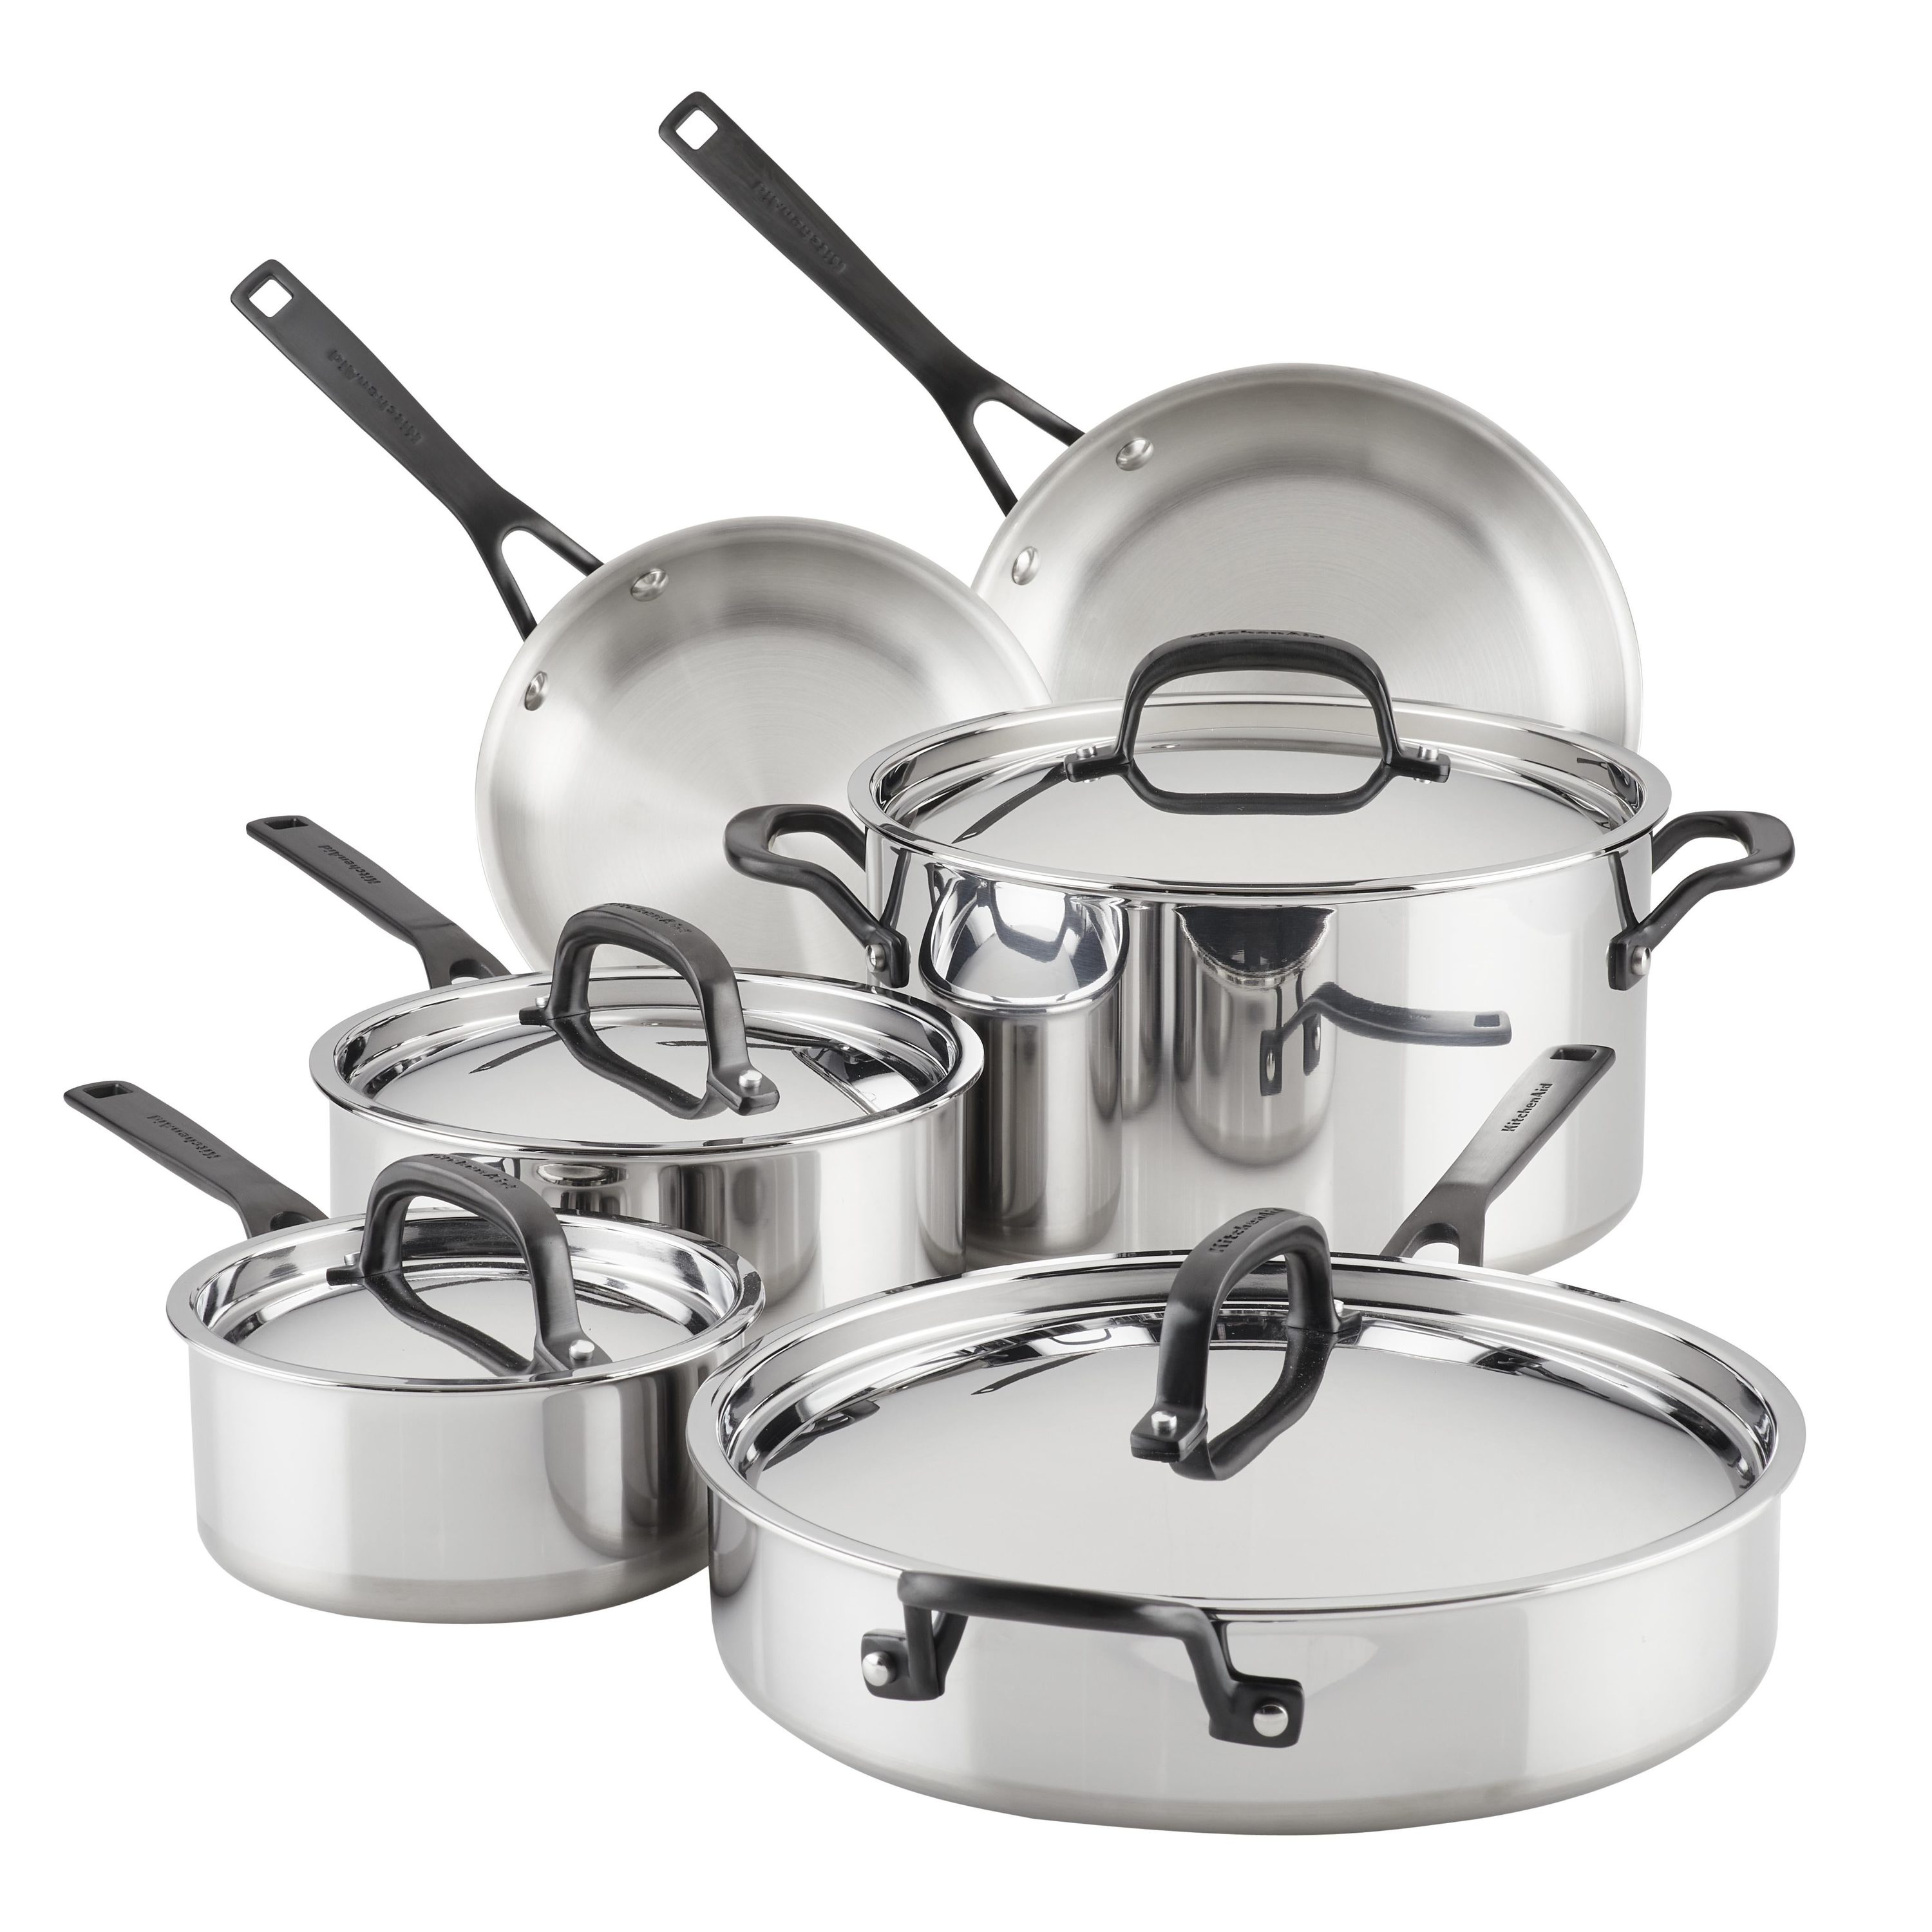 Cookware Set 10-Piece Stainless Steel Tri-Ply Clad Kitchen Frying Pan Oven Safe 